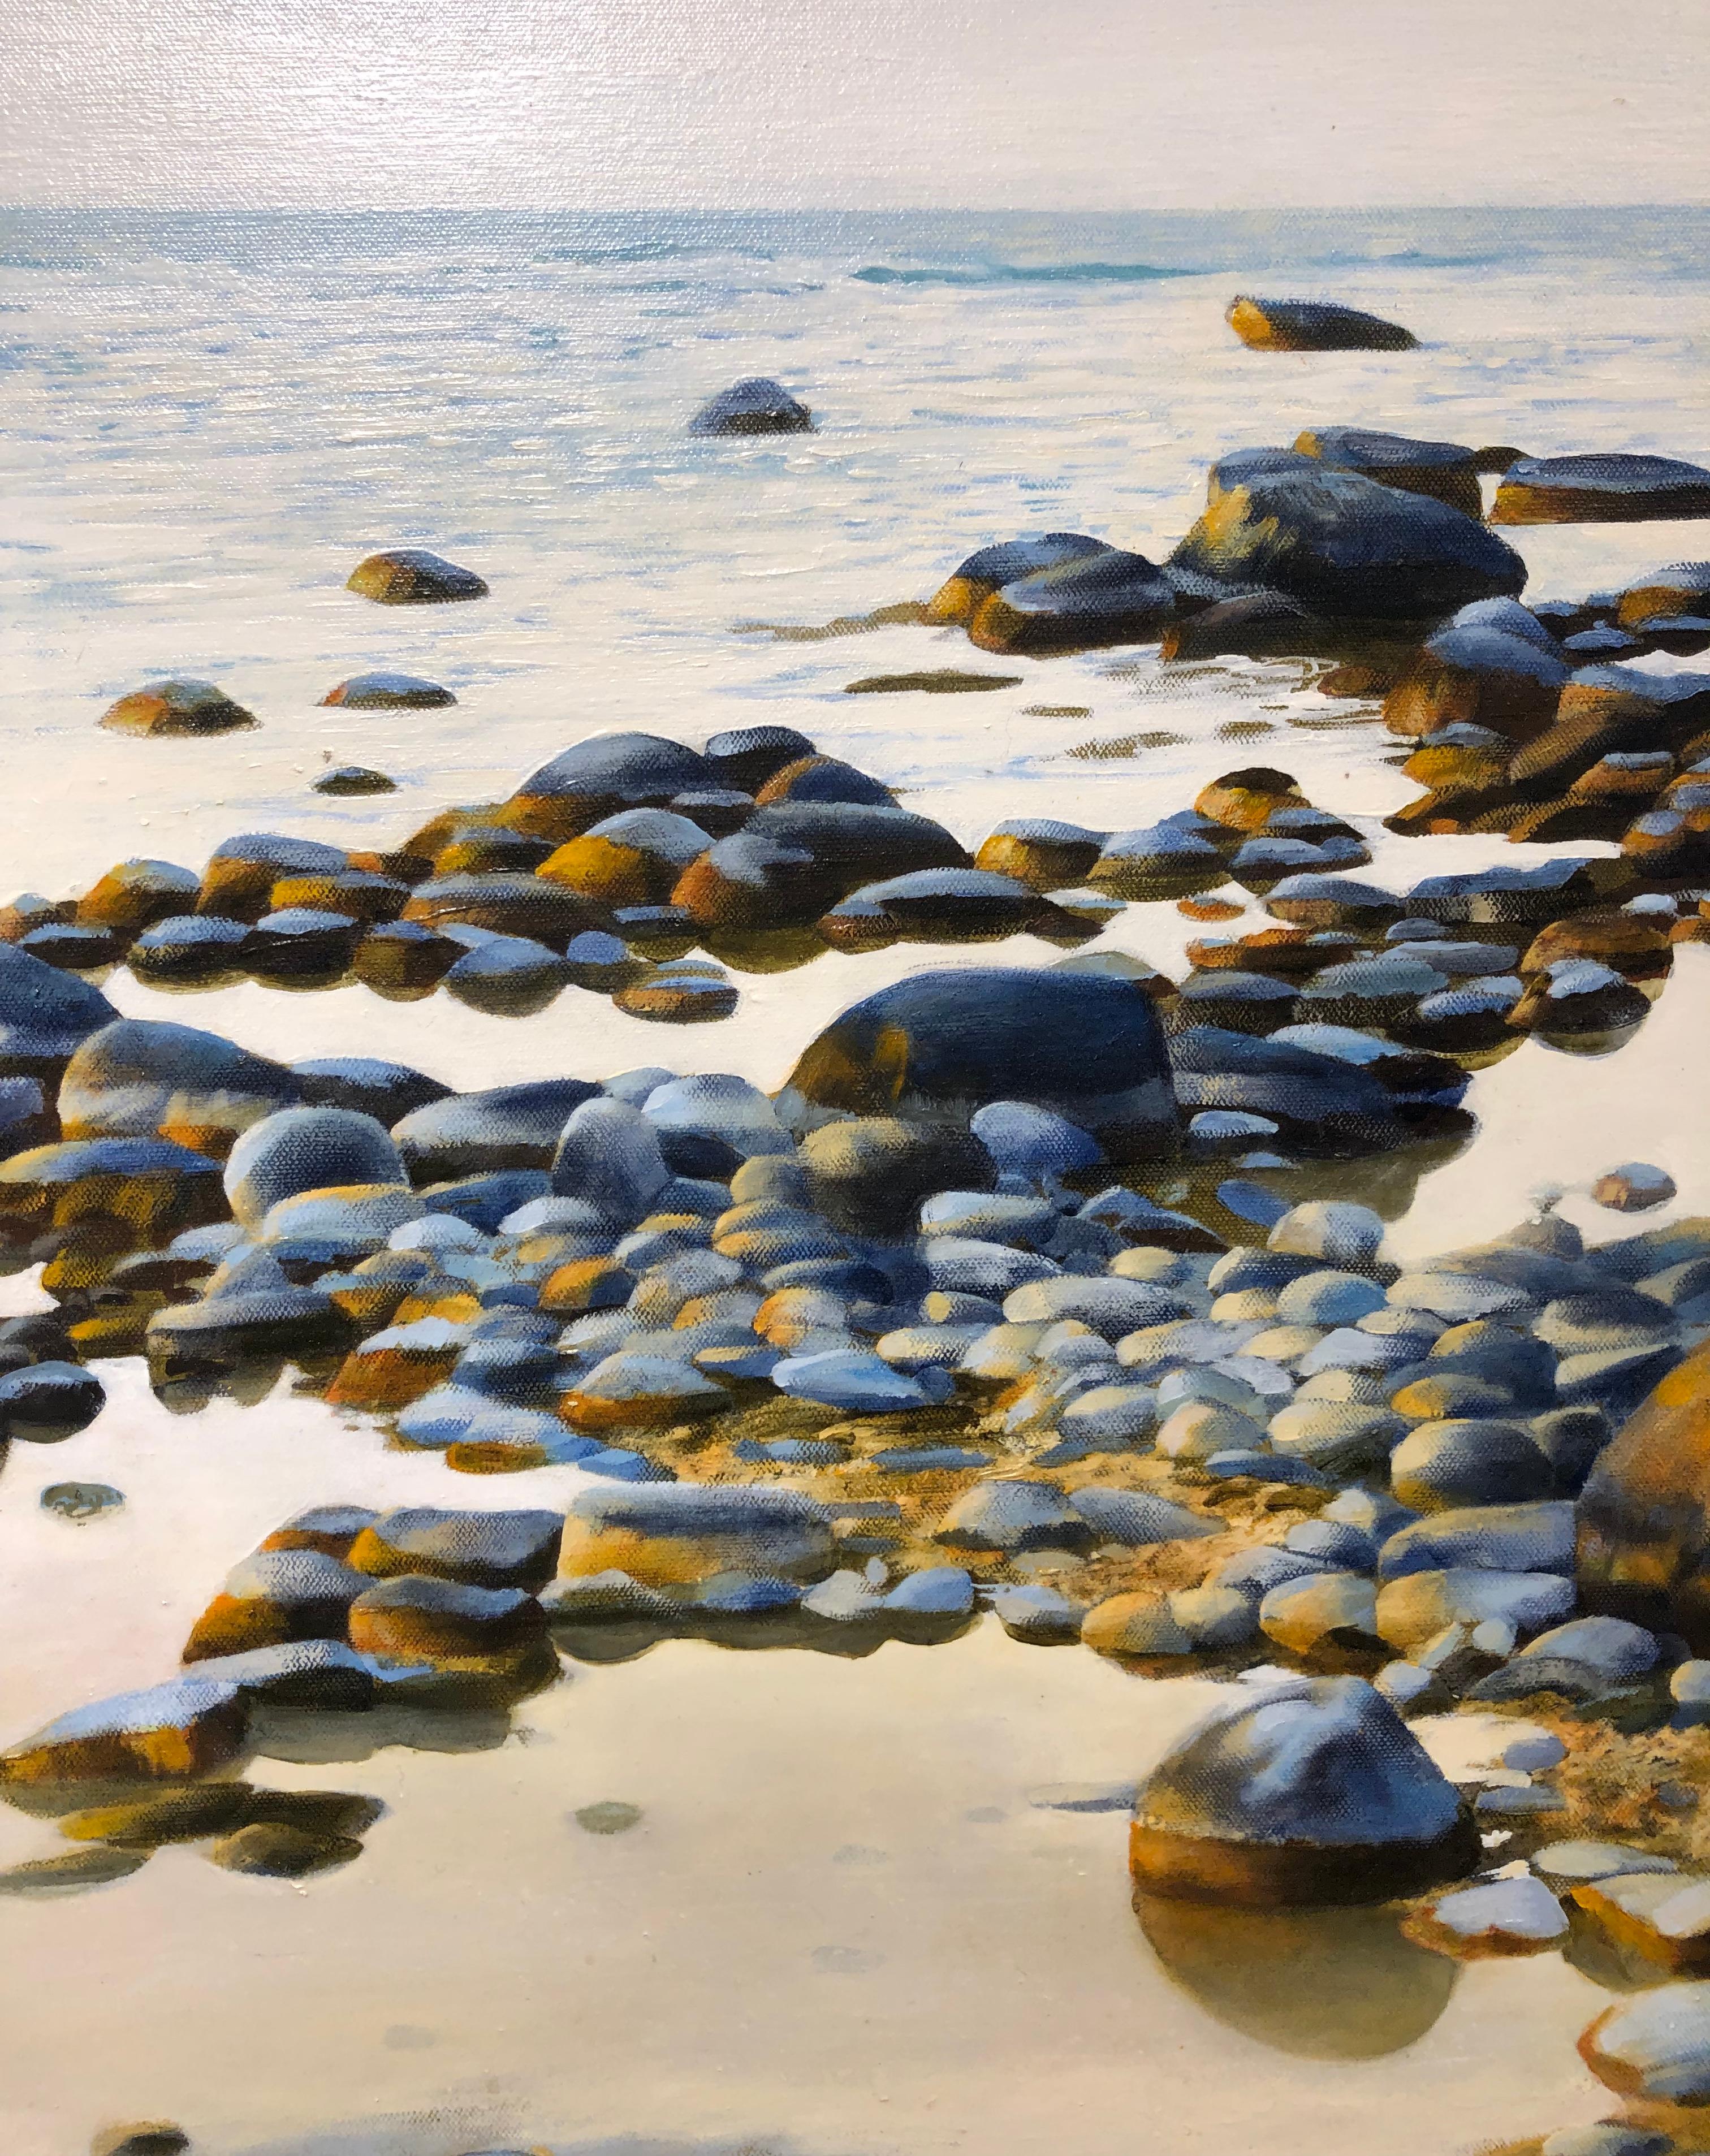 Along the rocky shores of Northern Michigan's Leelanau Peninsula, one might stubble upon this beautiful water scene.  The shimmering rocks, polished from years of water washing over them, are seen in a beautiful afternoon light.  The golden haze